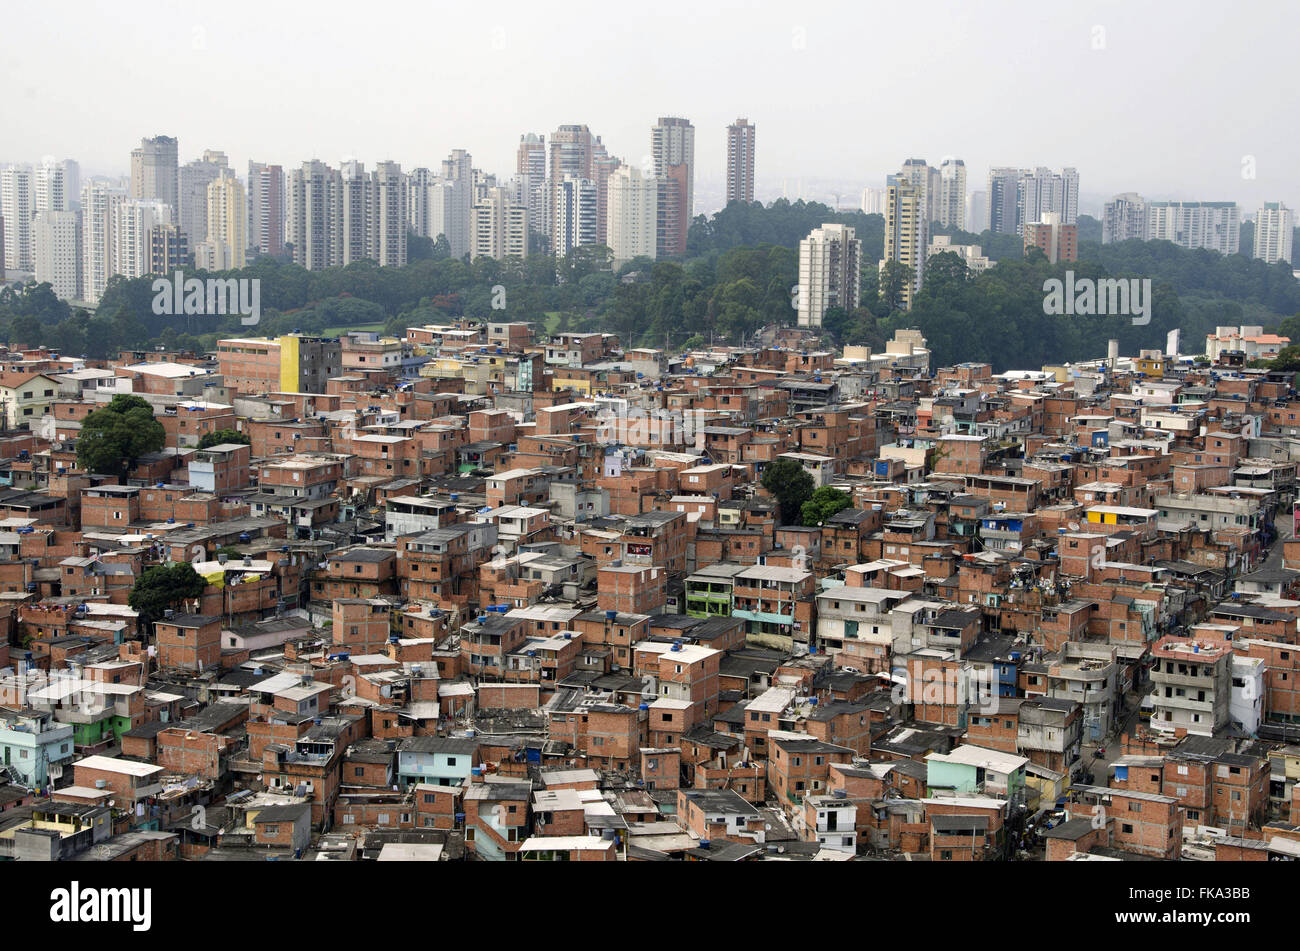 Favela Paraisópolis and buildings of Giovanni Gronchi the background - south of the city Stock Photo